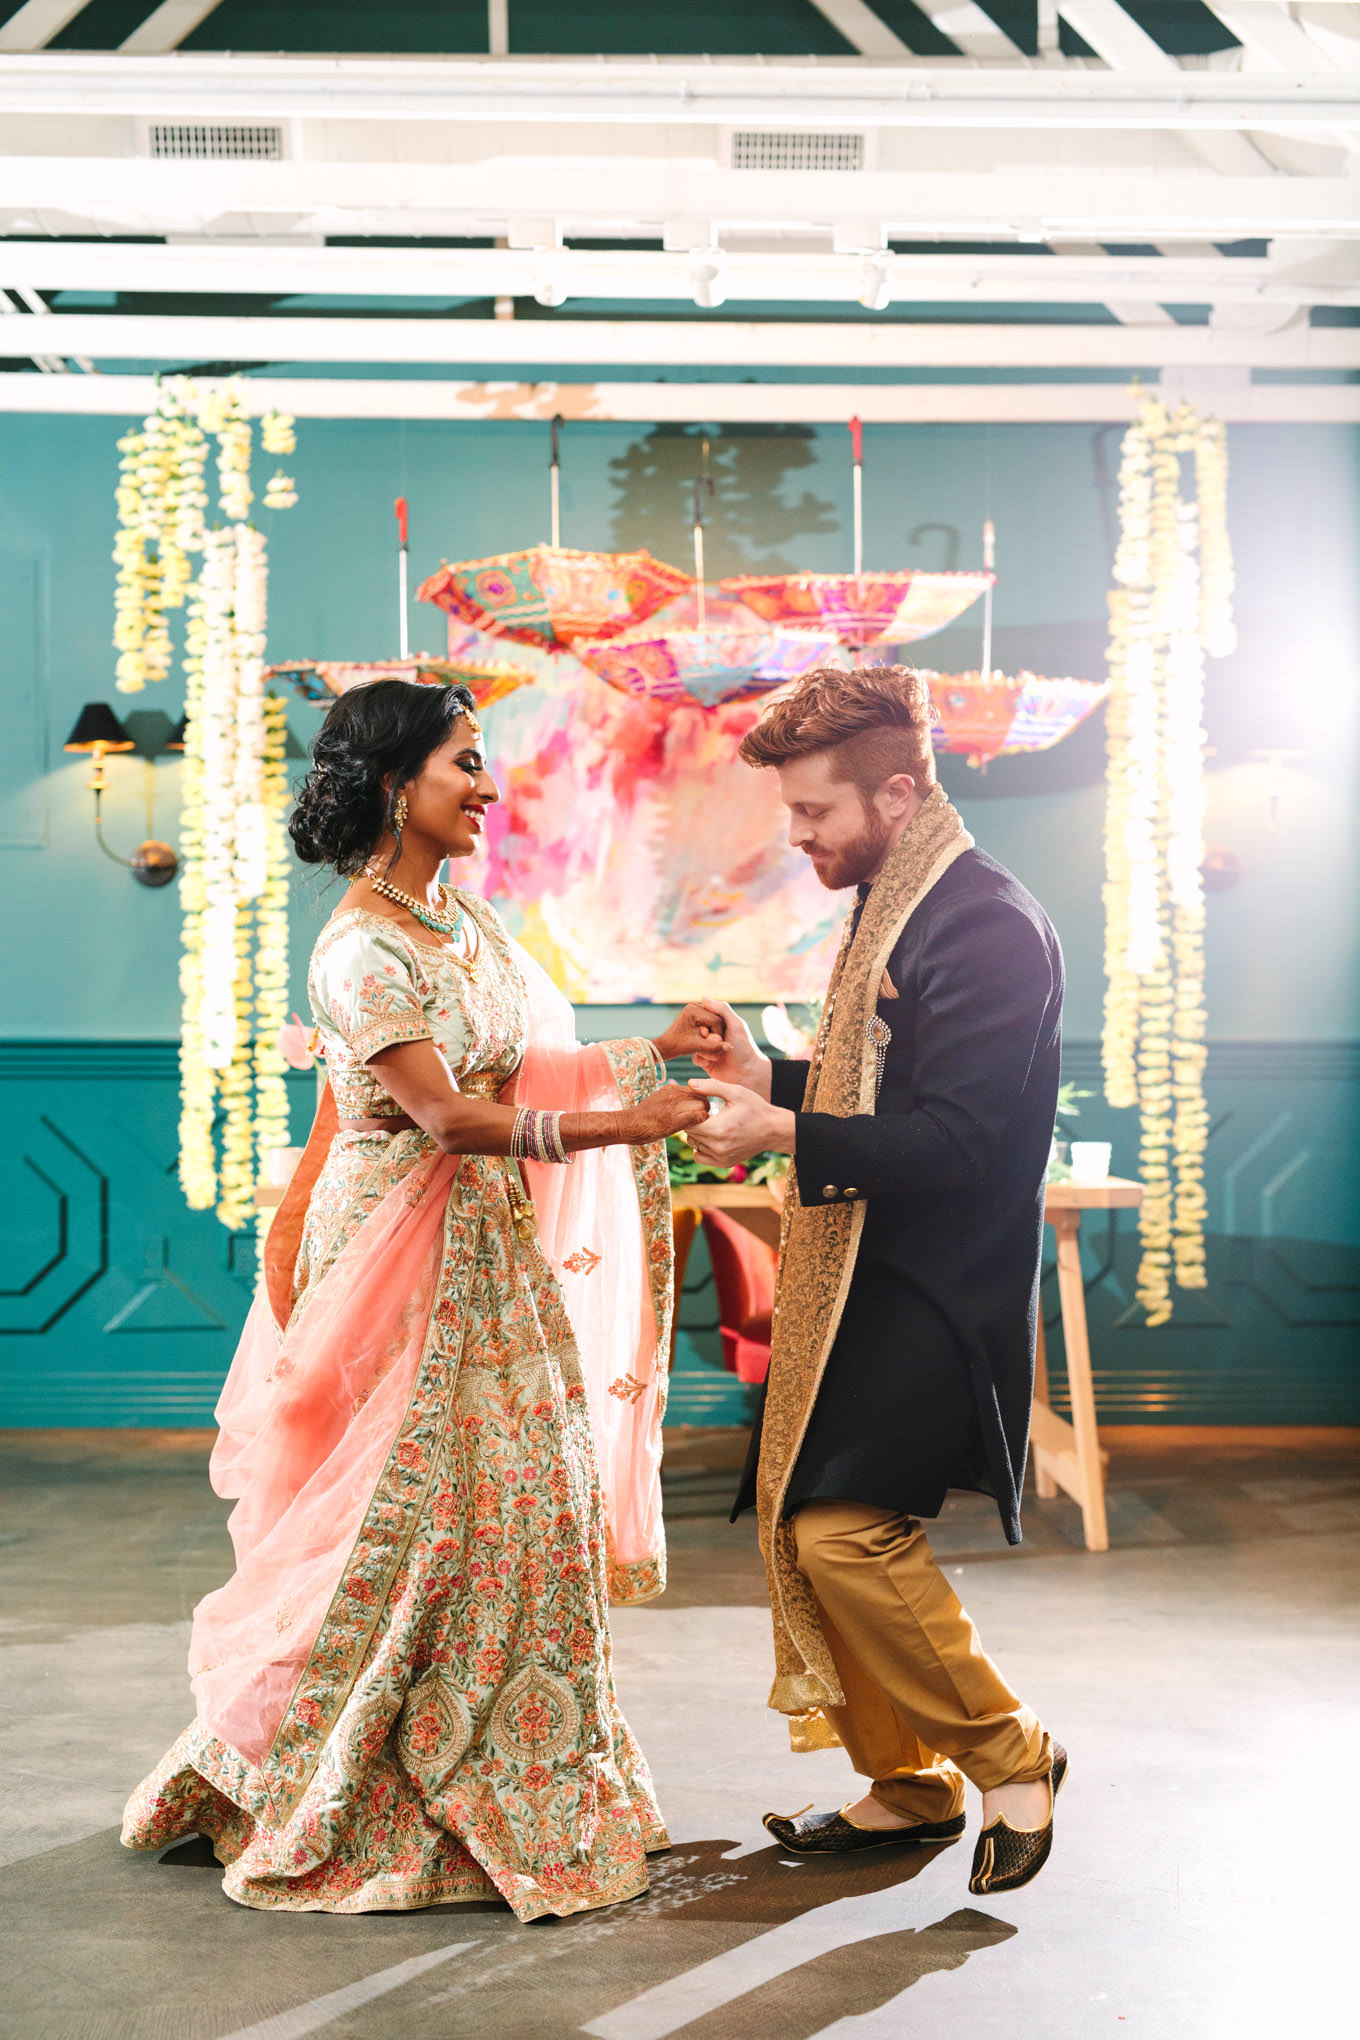 Bride and groom's first dance. Two Disney artists create a unique and colorful Indian Fusion wedding at The Fig House Los Angeles, featured on Green Wedding Shoes. | Colorful and elevated wedding inspiration for fun-loving couples in Southern California | #indianwedding #indianfusionwedding #thefighouse #losangeleswedding   Source: Mary Costa Photography | Los Angeles